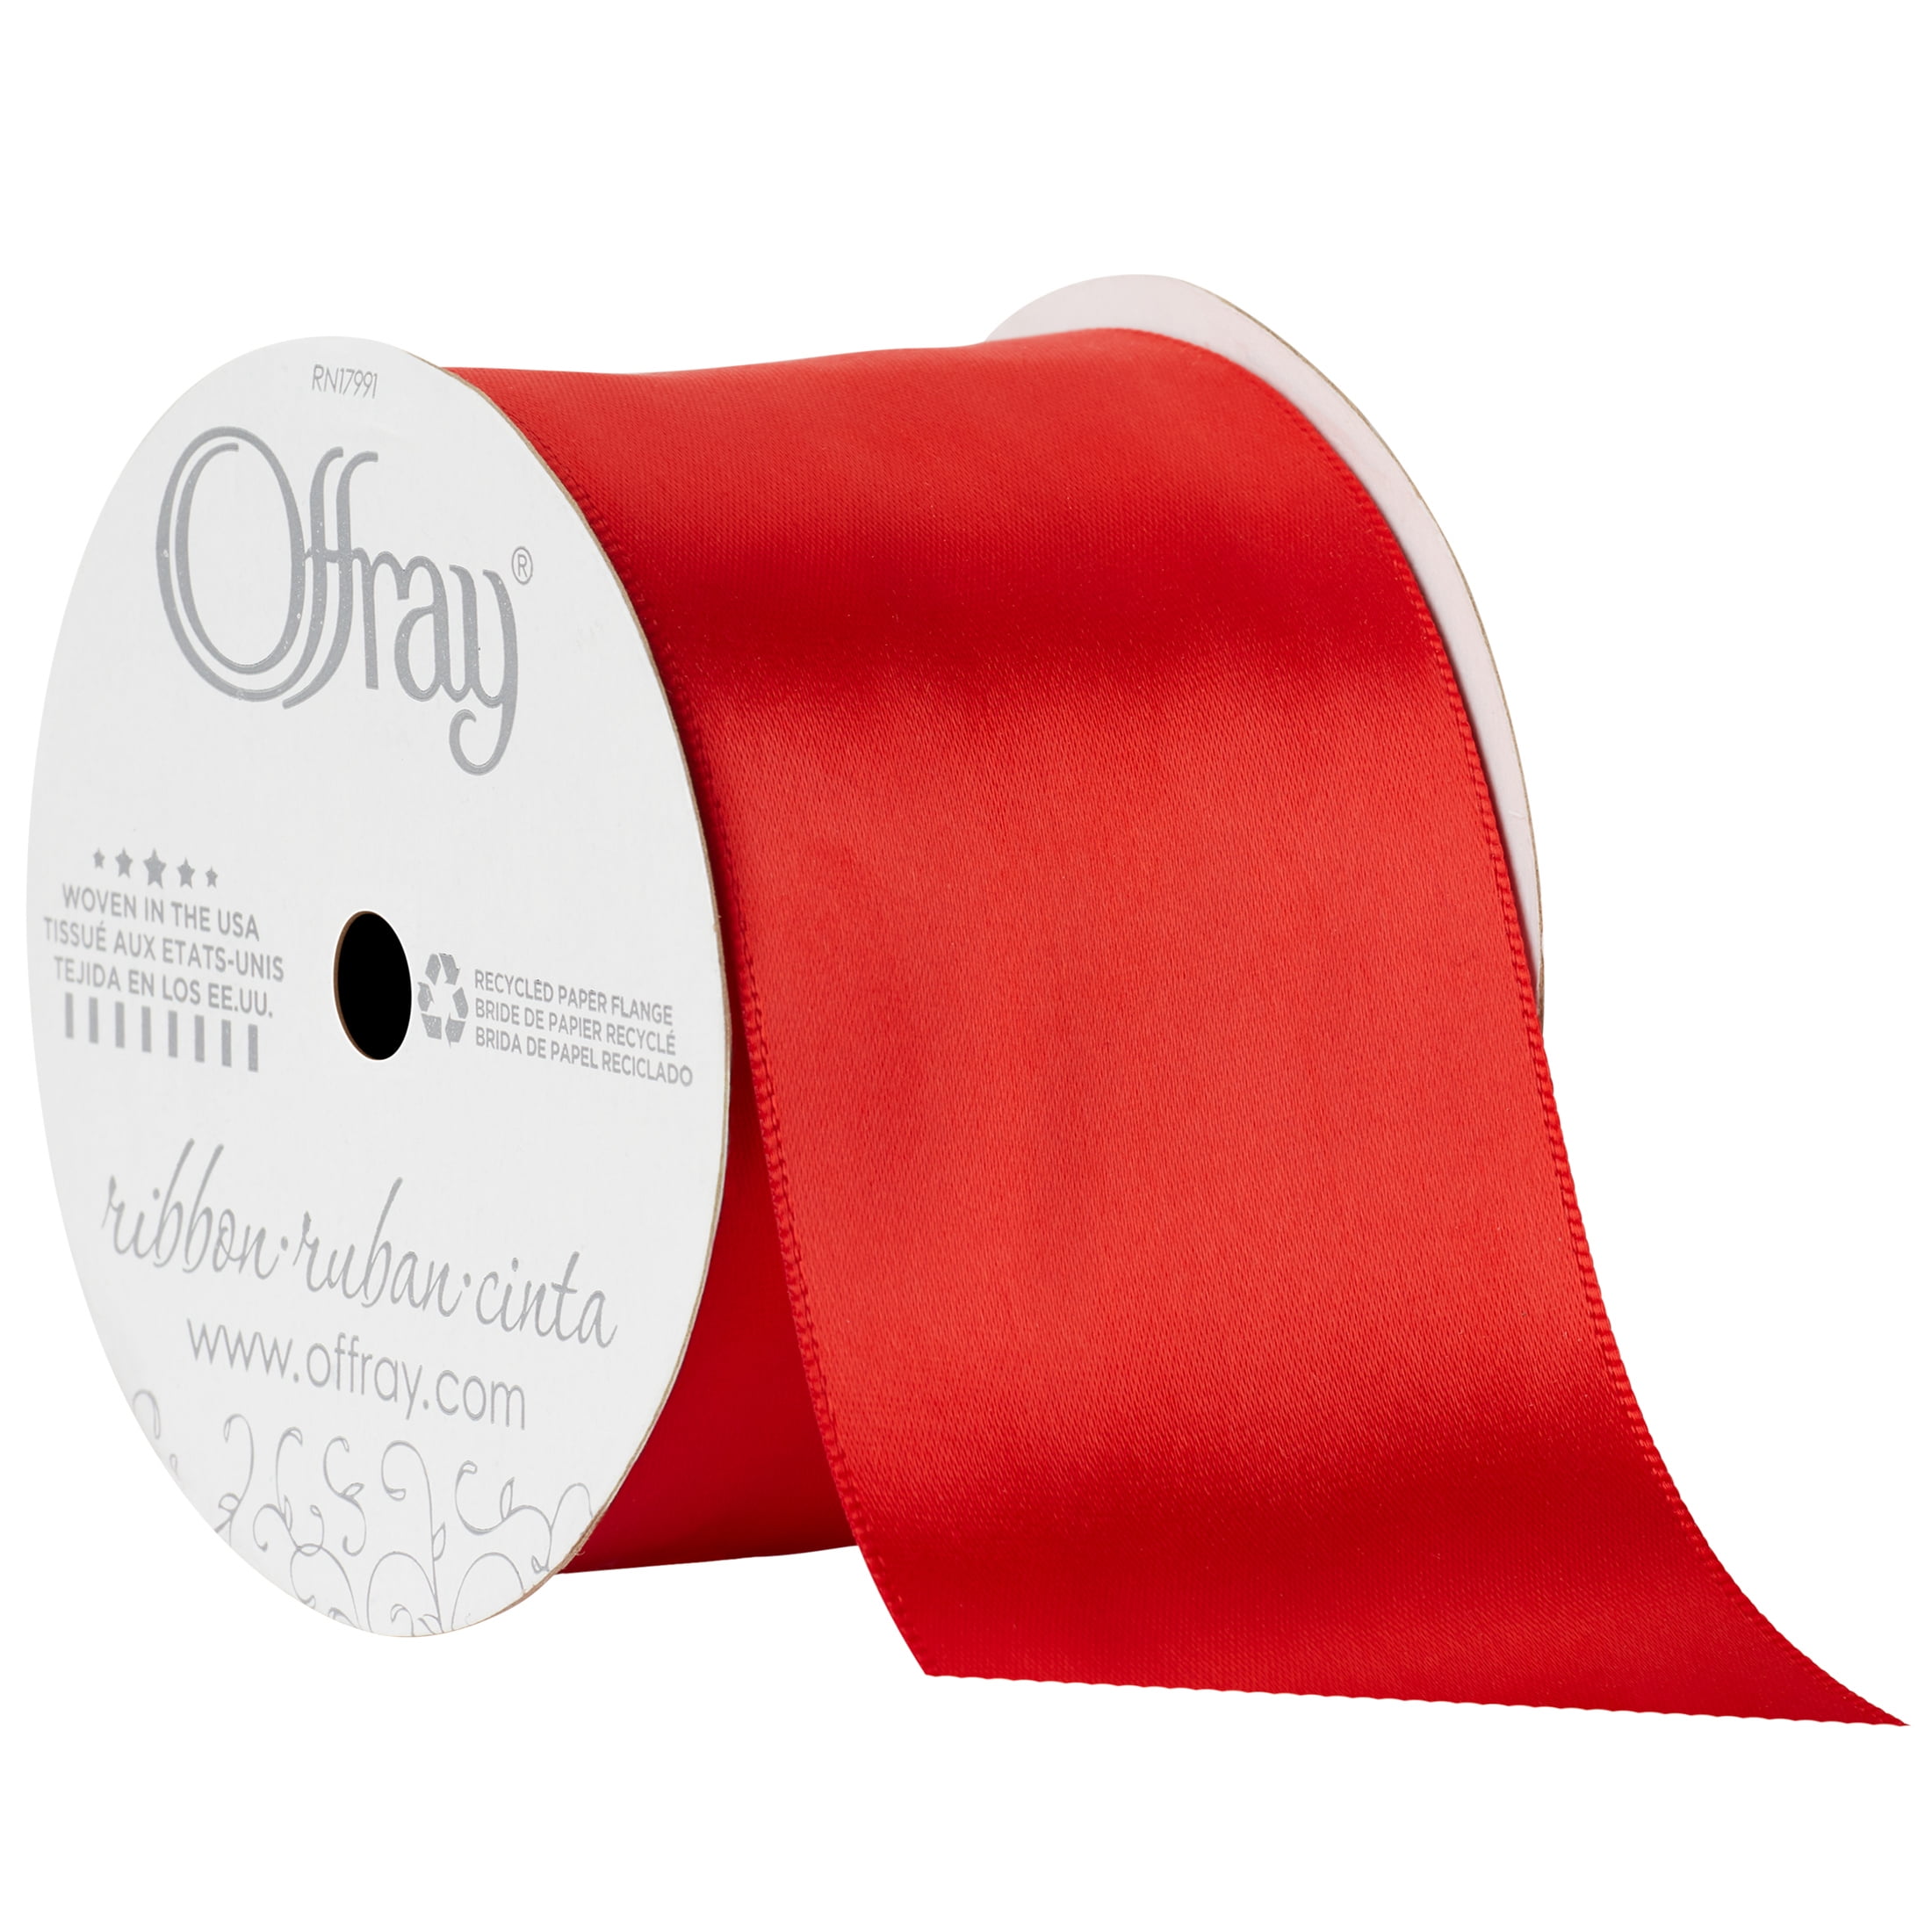 Offray Ribbon, Red 2 1/4 inch Single Face Satin Polyester Ribbon, 9 feet